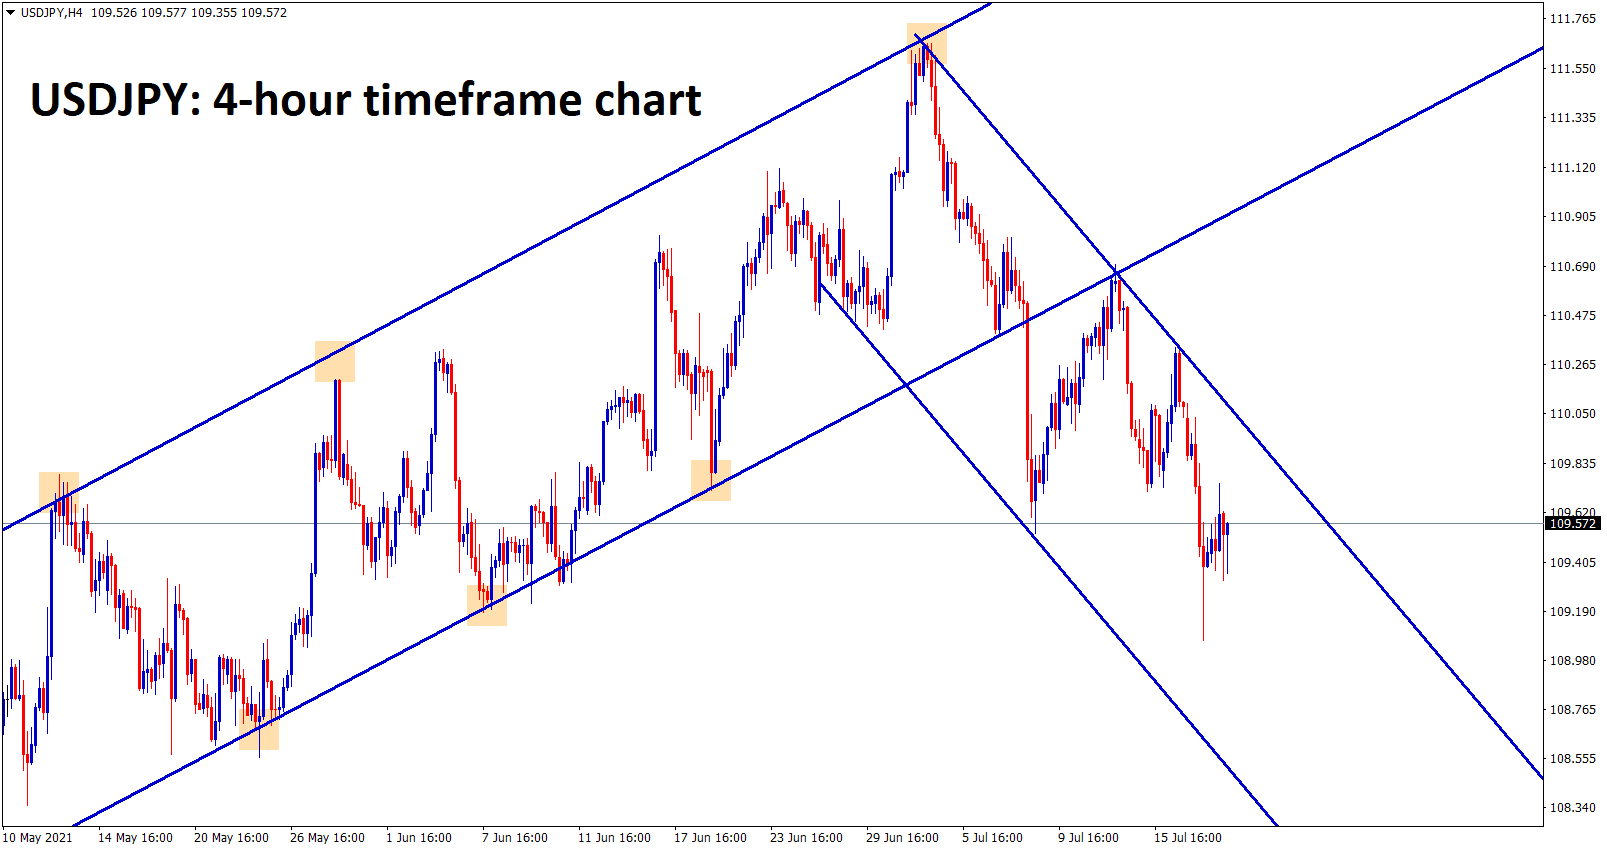 USDJPY is still moving between the channel ranges